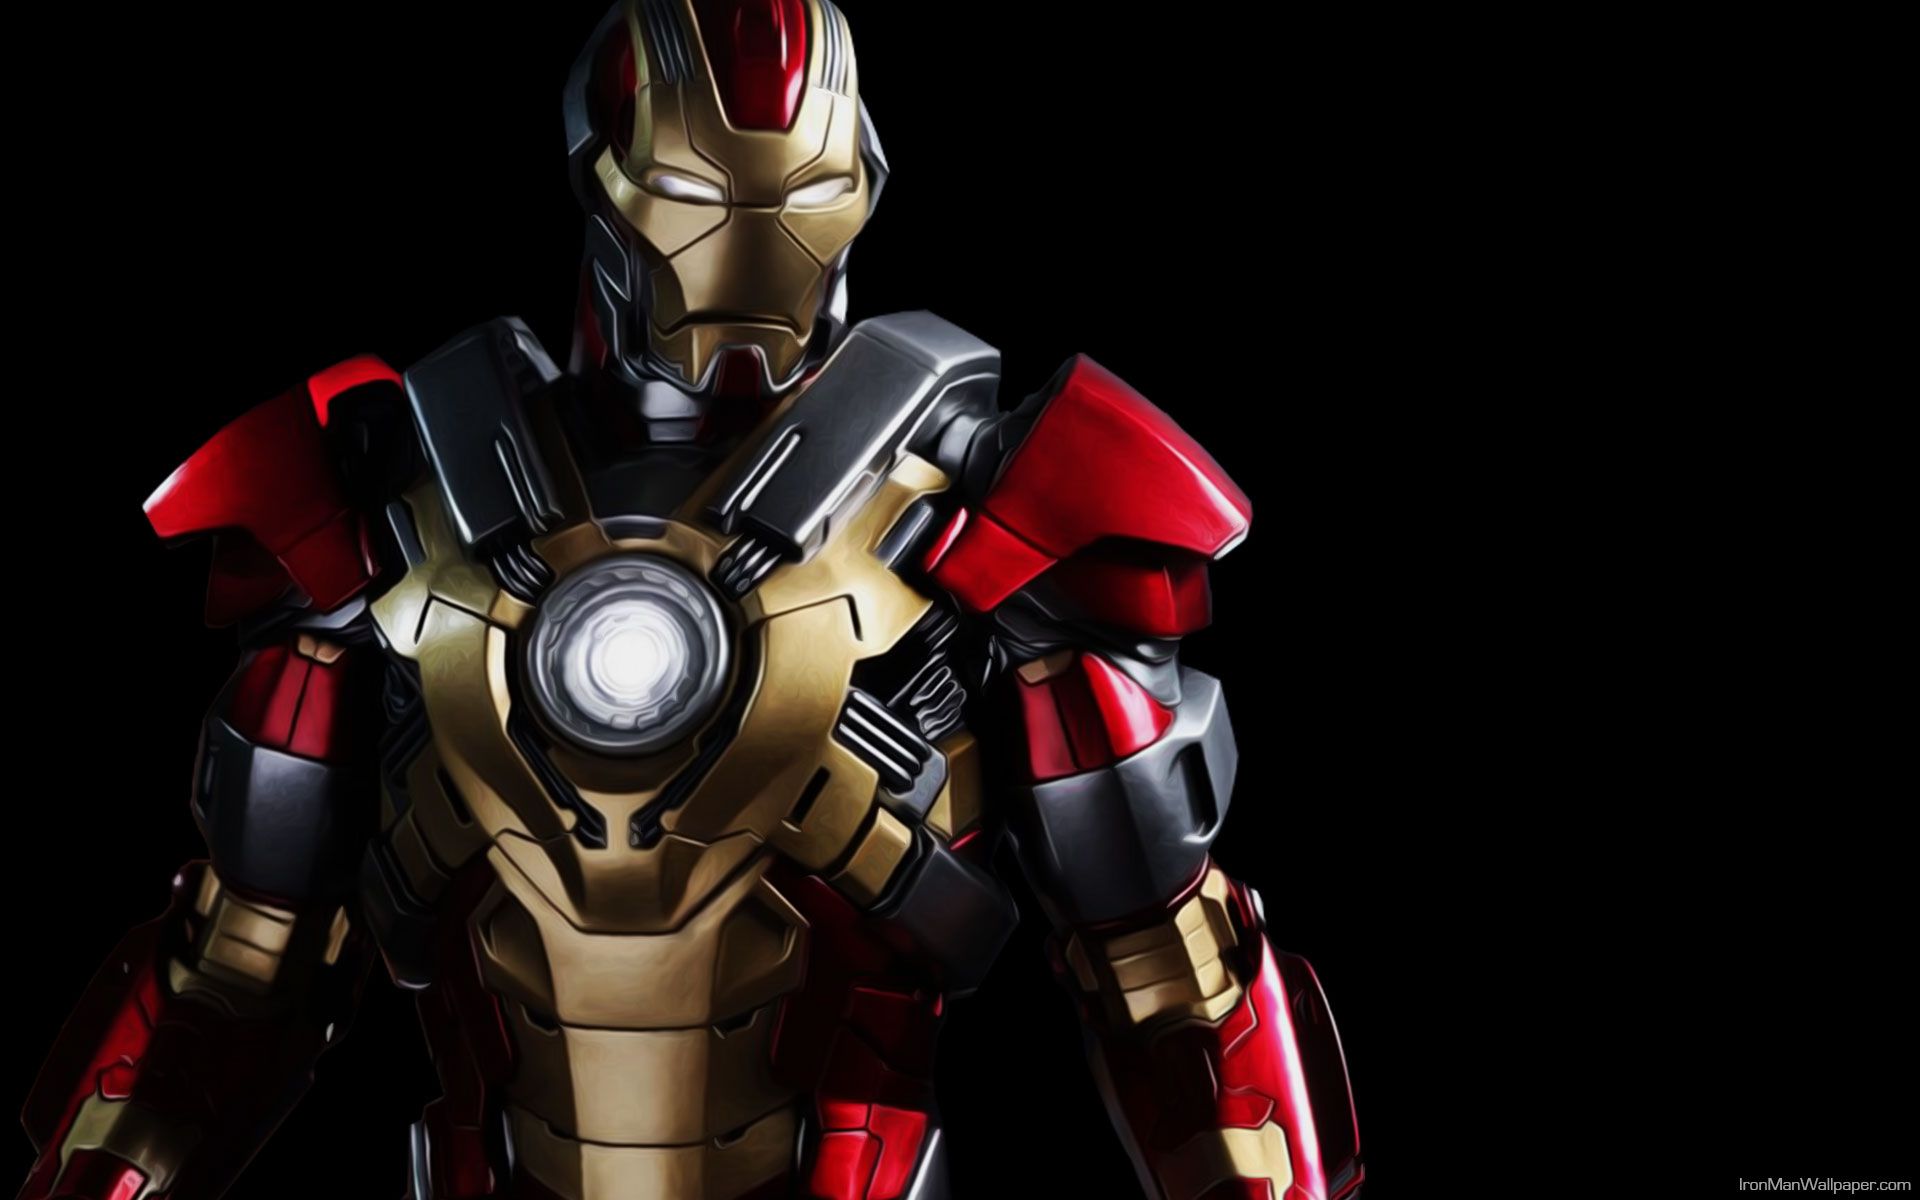 Iron Man Avangers Wallpapers for Laptops 4419 - HD Wallpapers Site